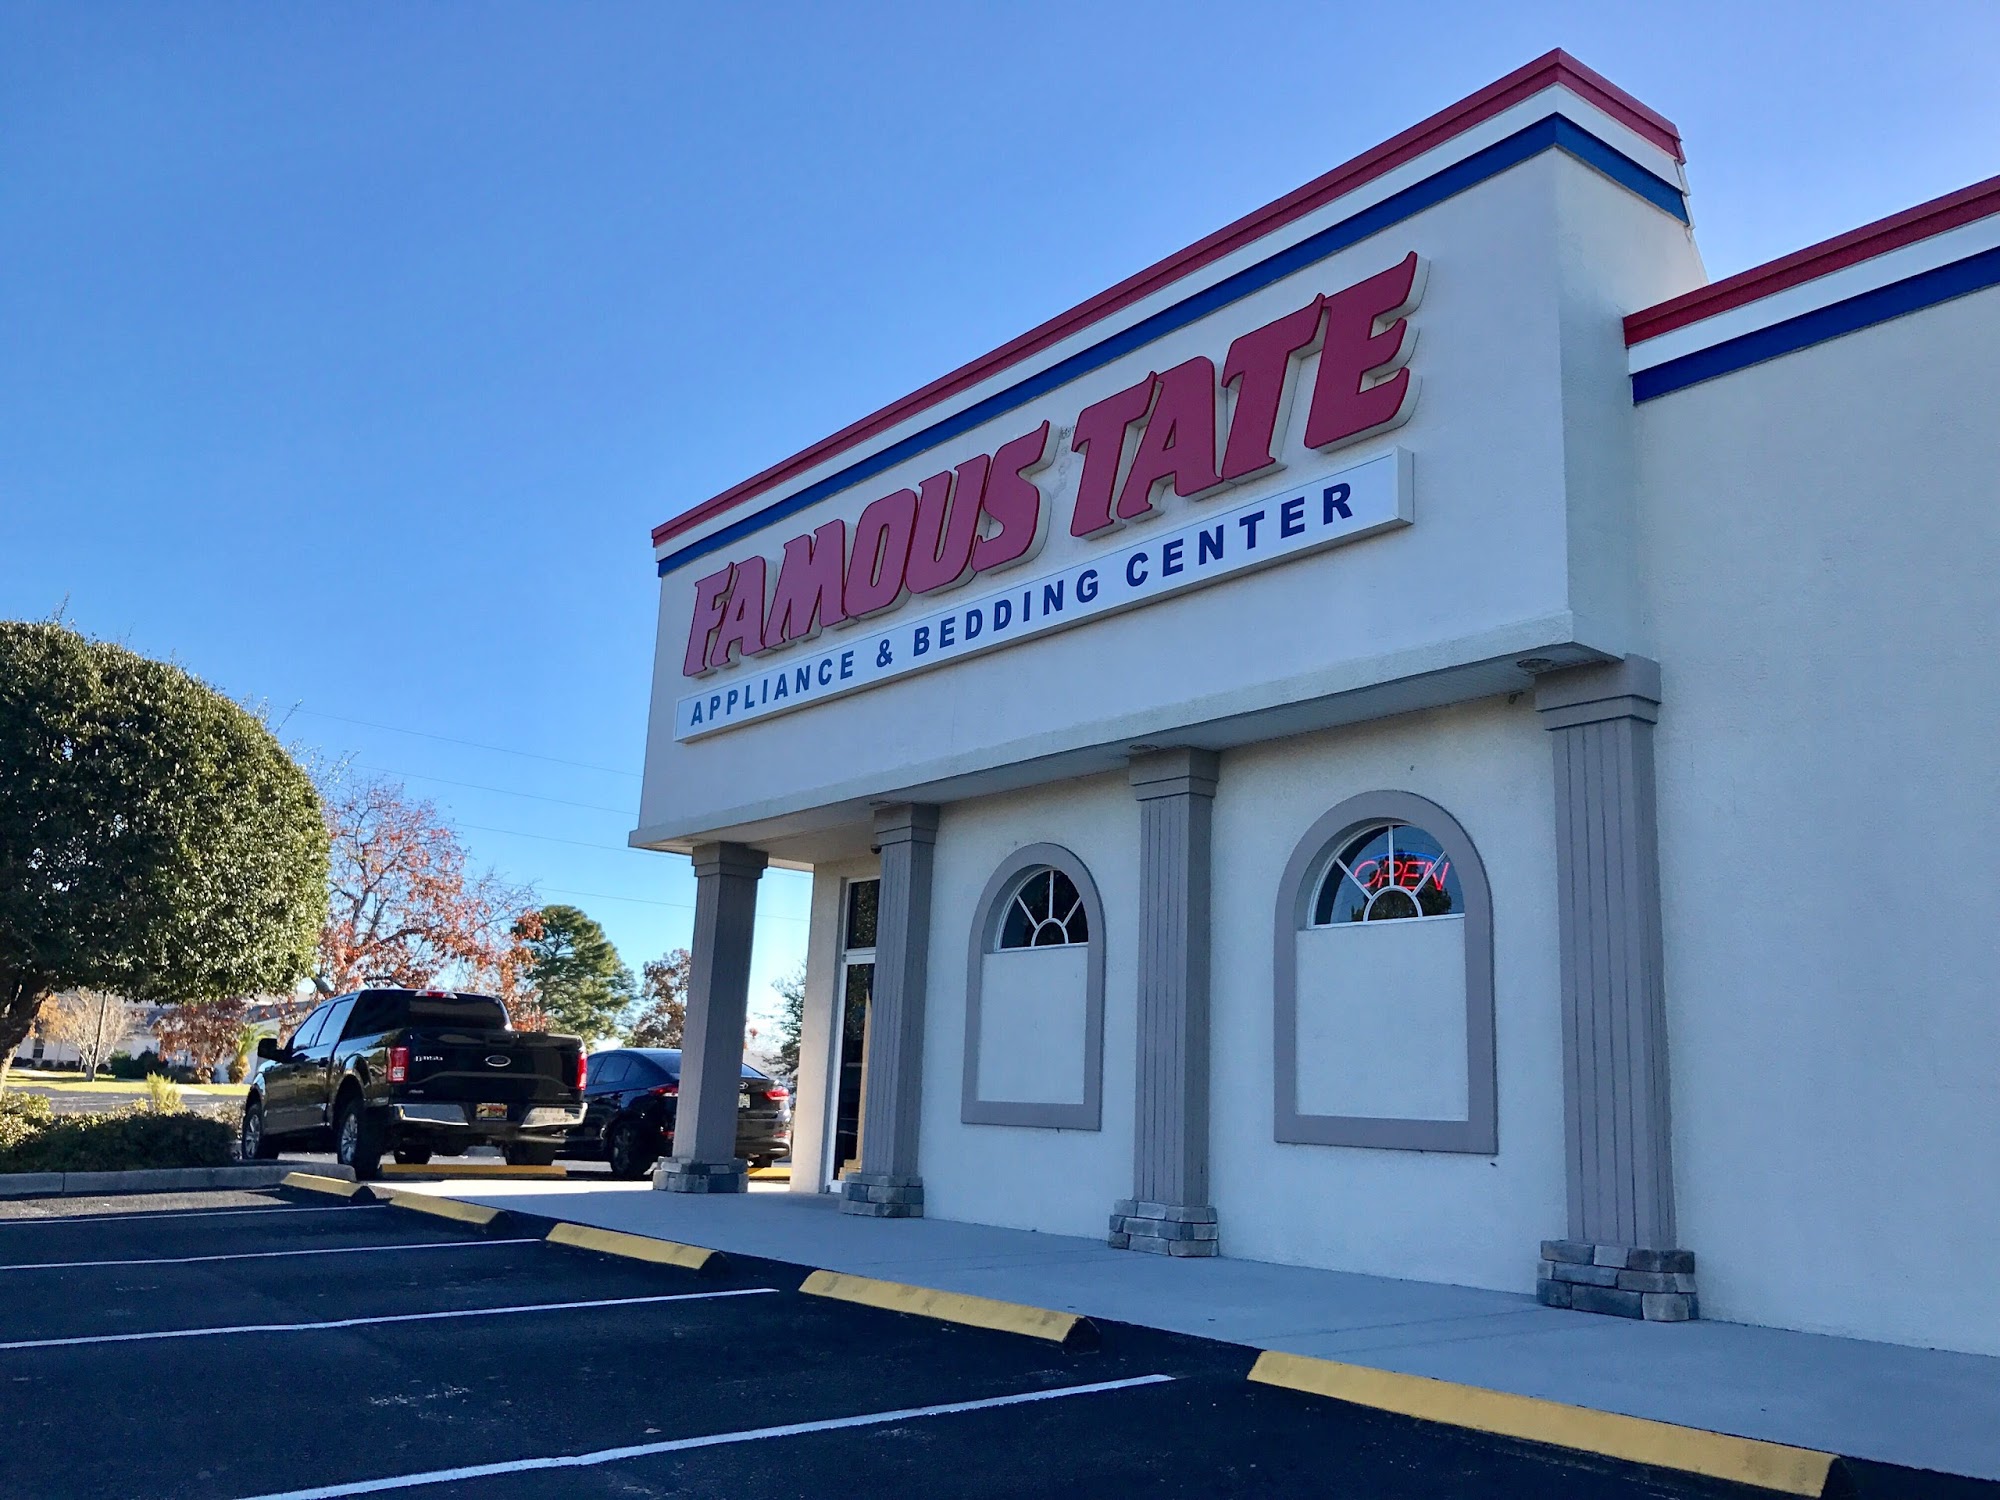 Famous Tate Appliance and Bedding Centers